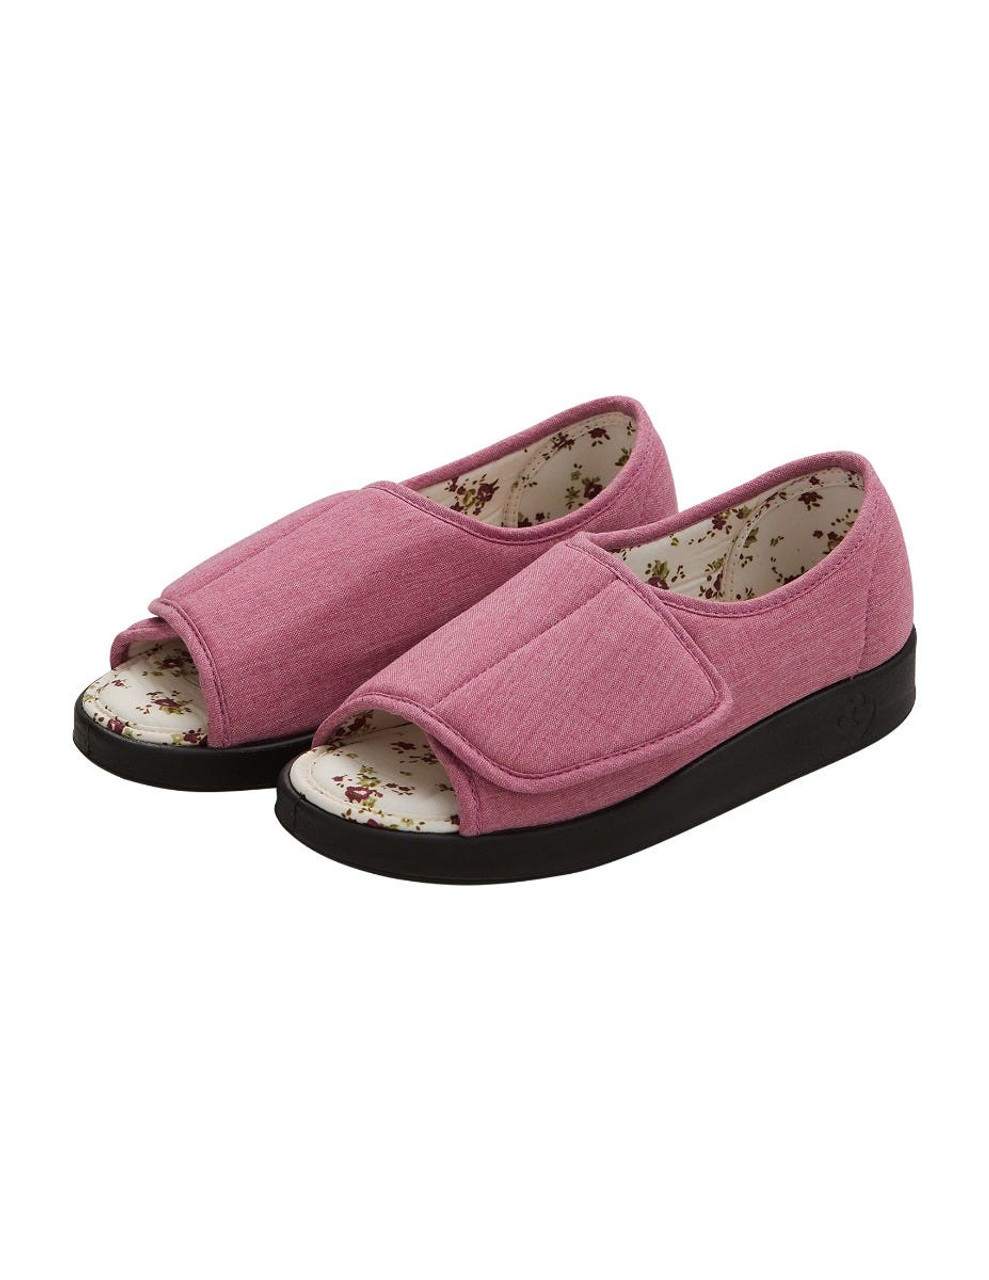 Silverts SV15180 Womens Extra Wide Open Toed Shoes for Indoor & Outdoor  Misty Rose, Size=12, SV15180-SVMRB-12